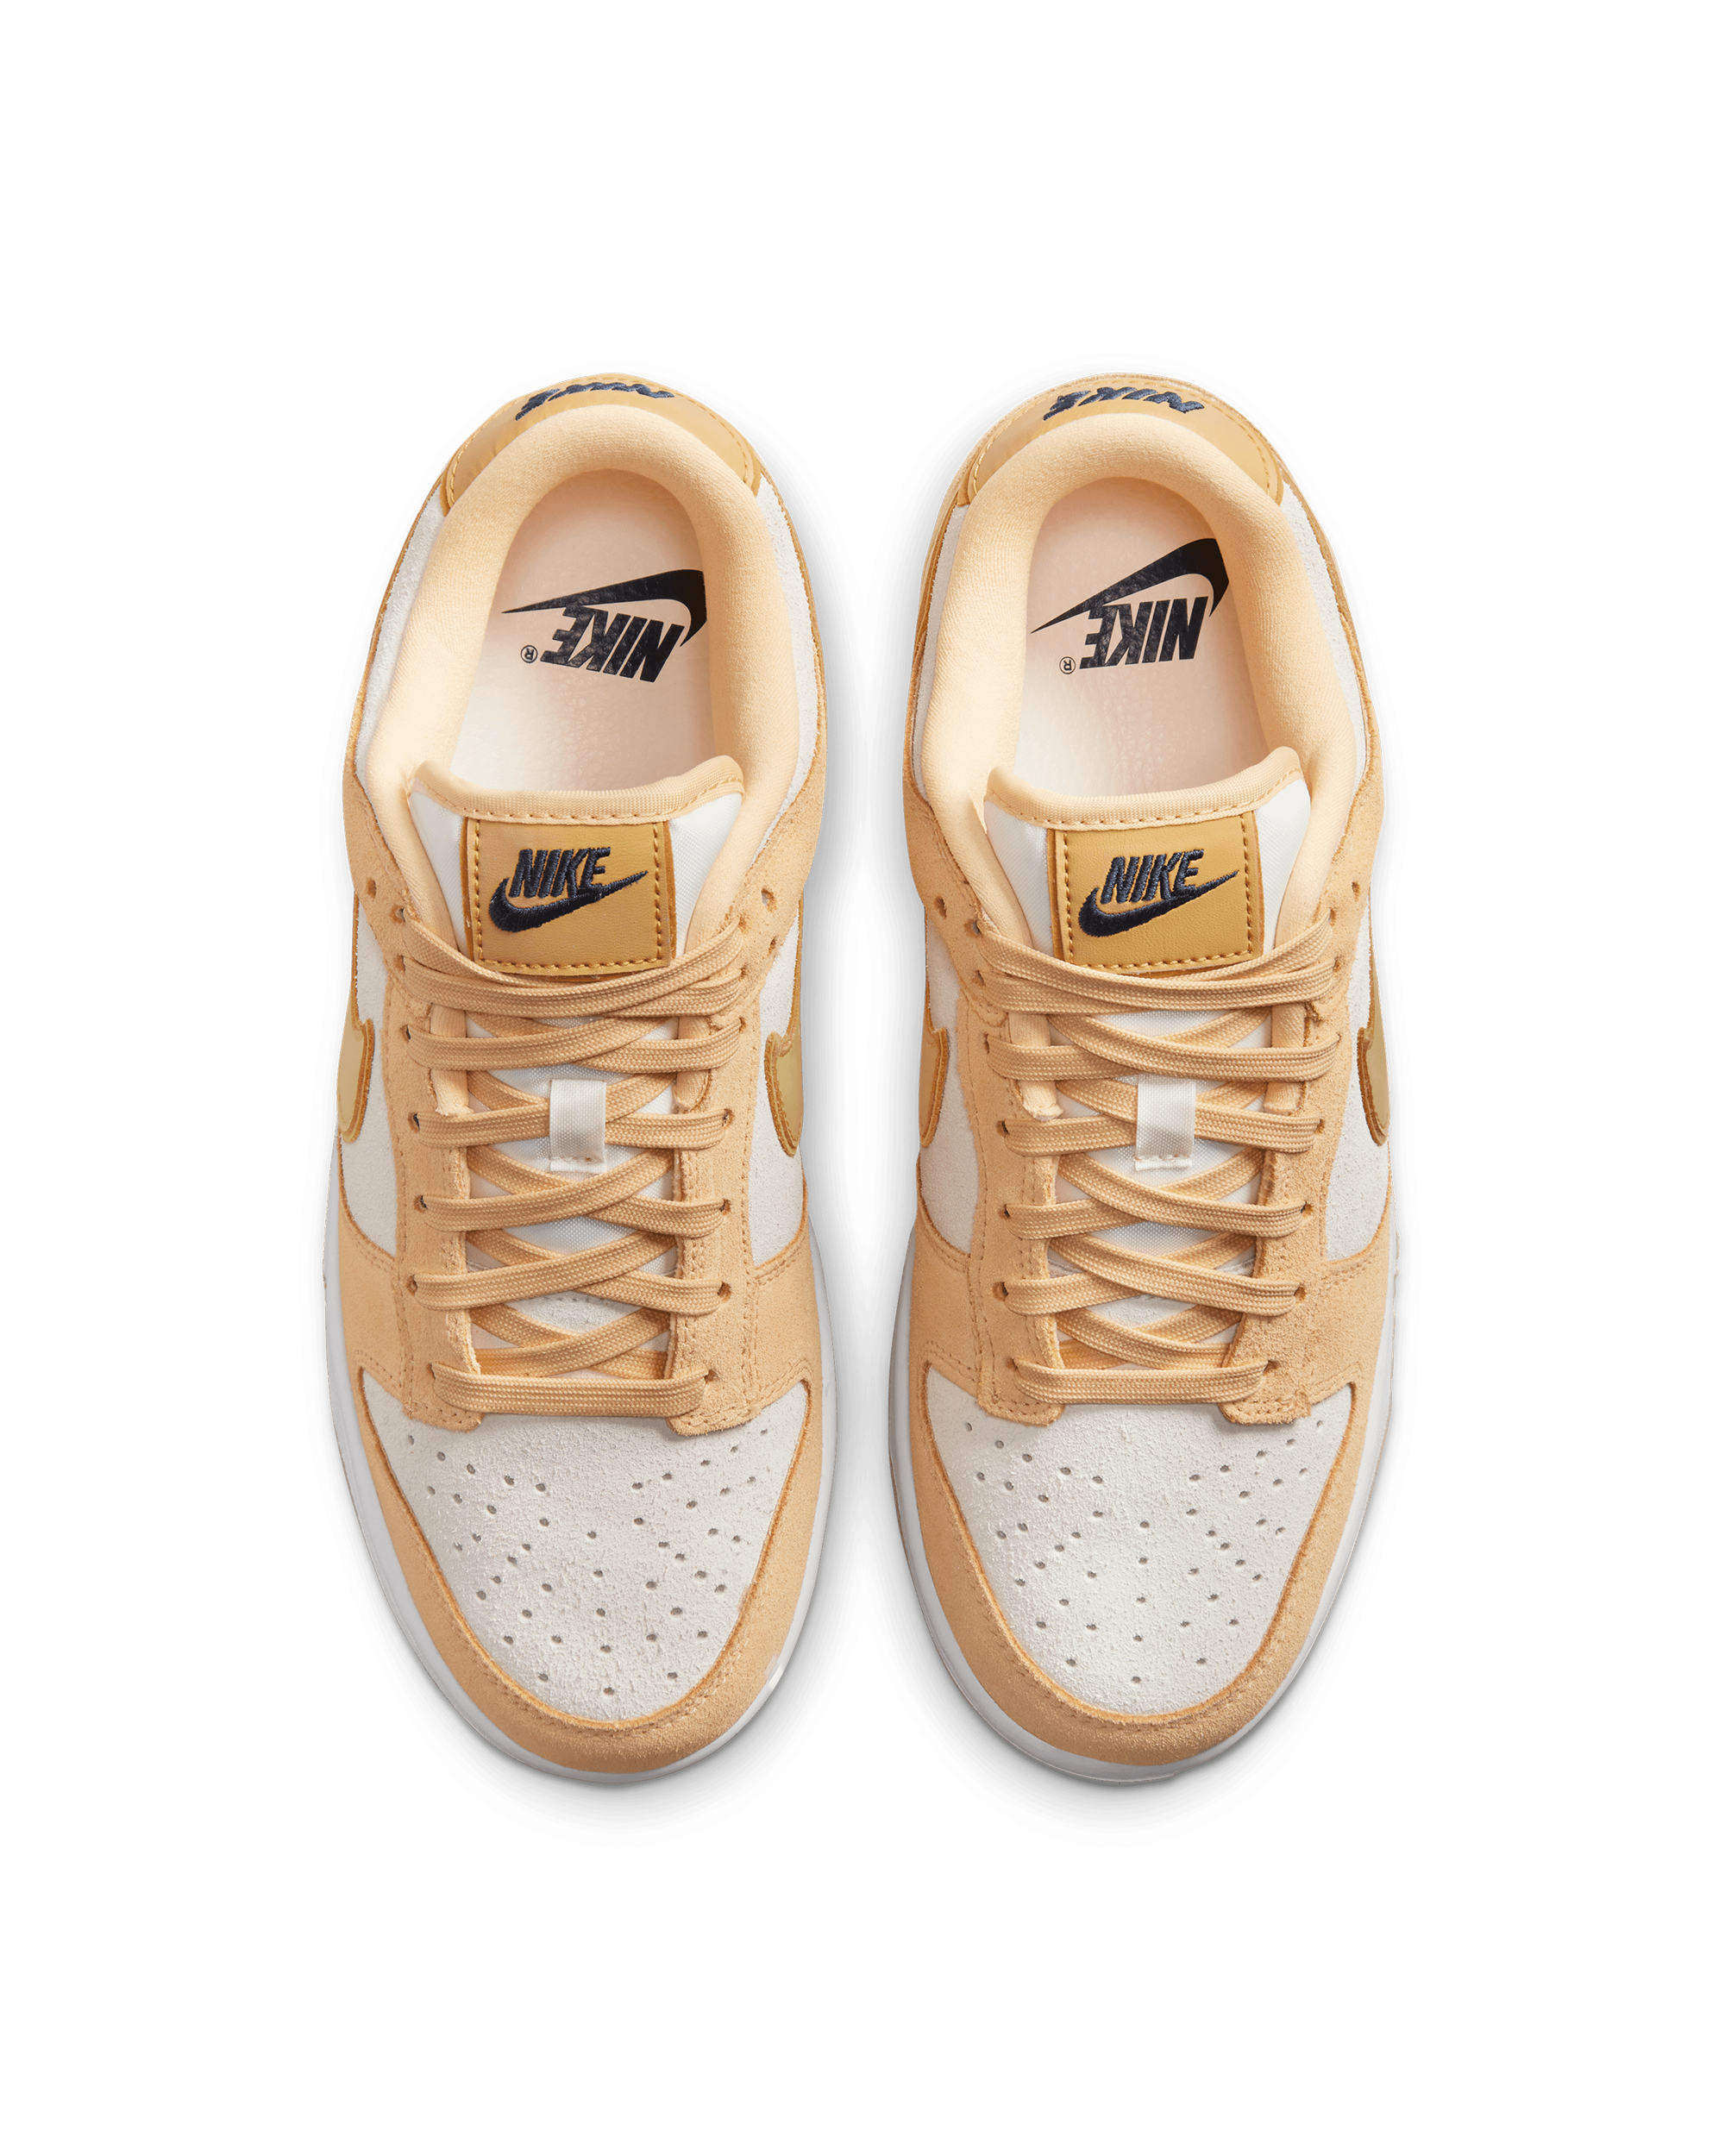 Womens Dunk Low LX - Celestial Gold / Wheat Gold / Sail